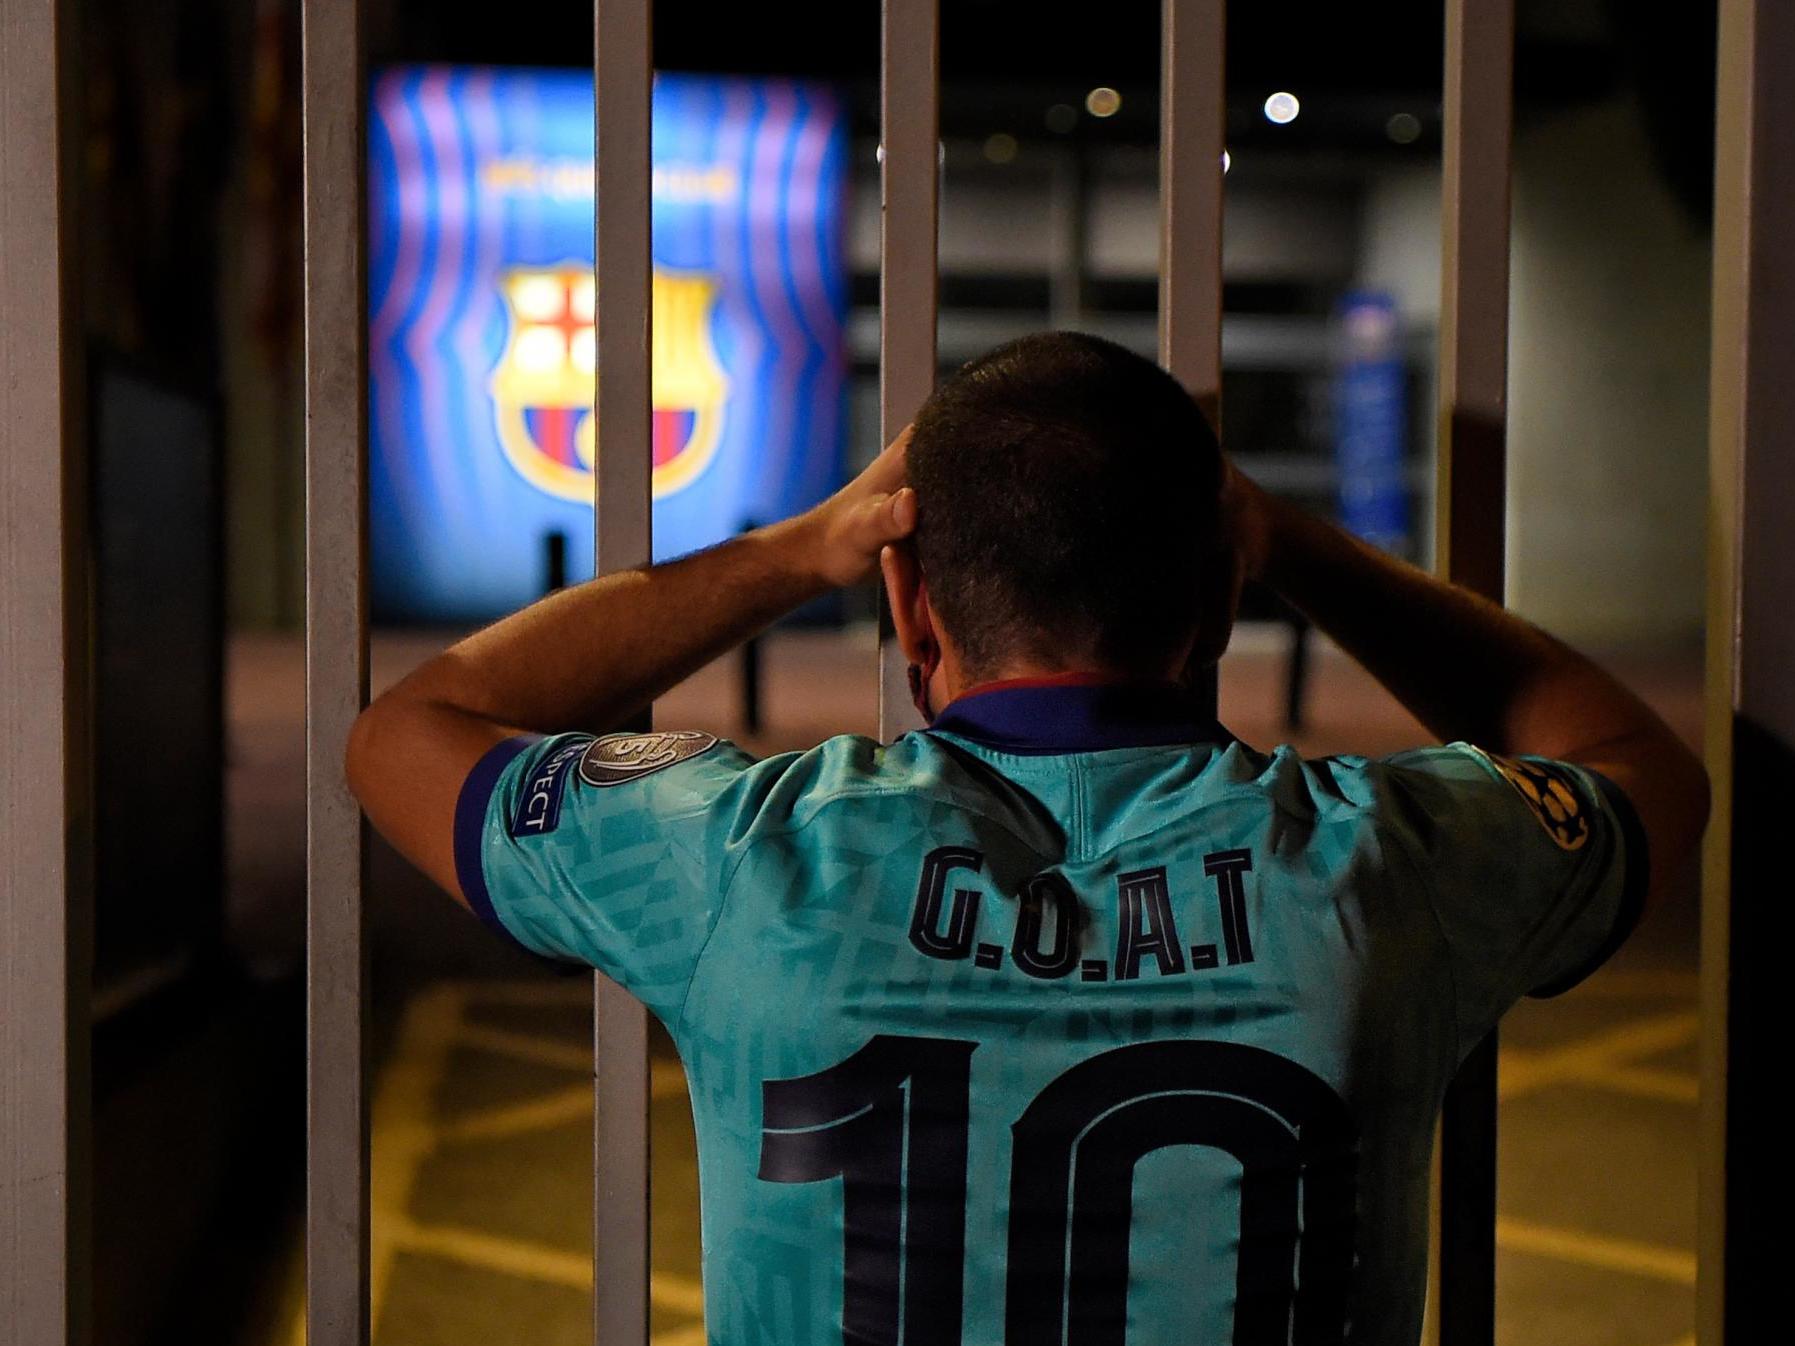 A Barcelona fan with a shirt referencing Lionel Messi at the Nou Camp